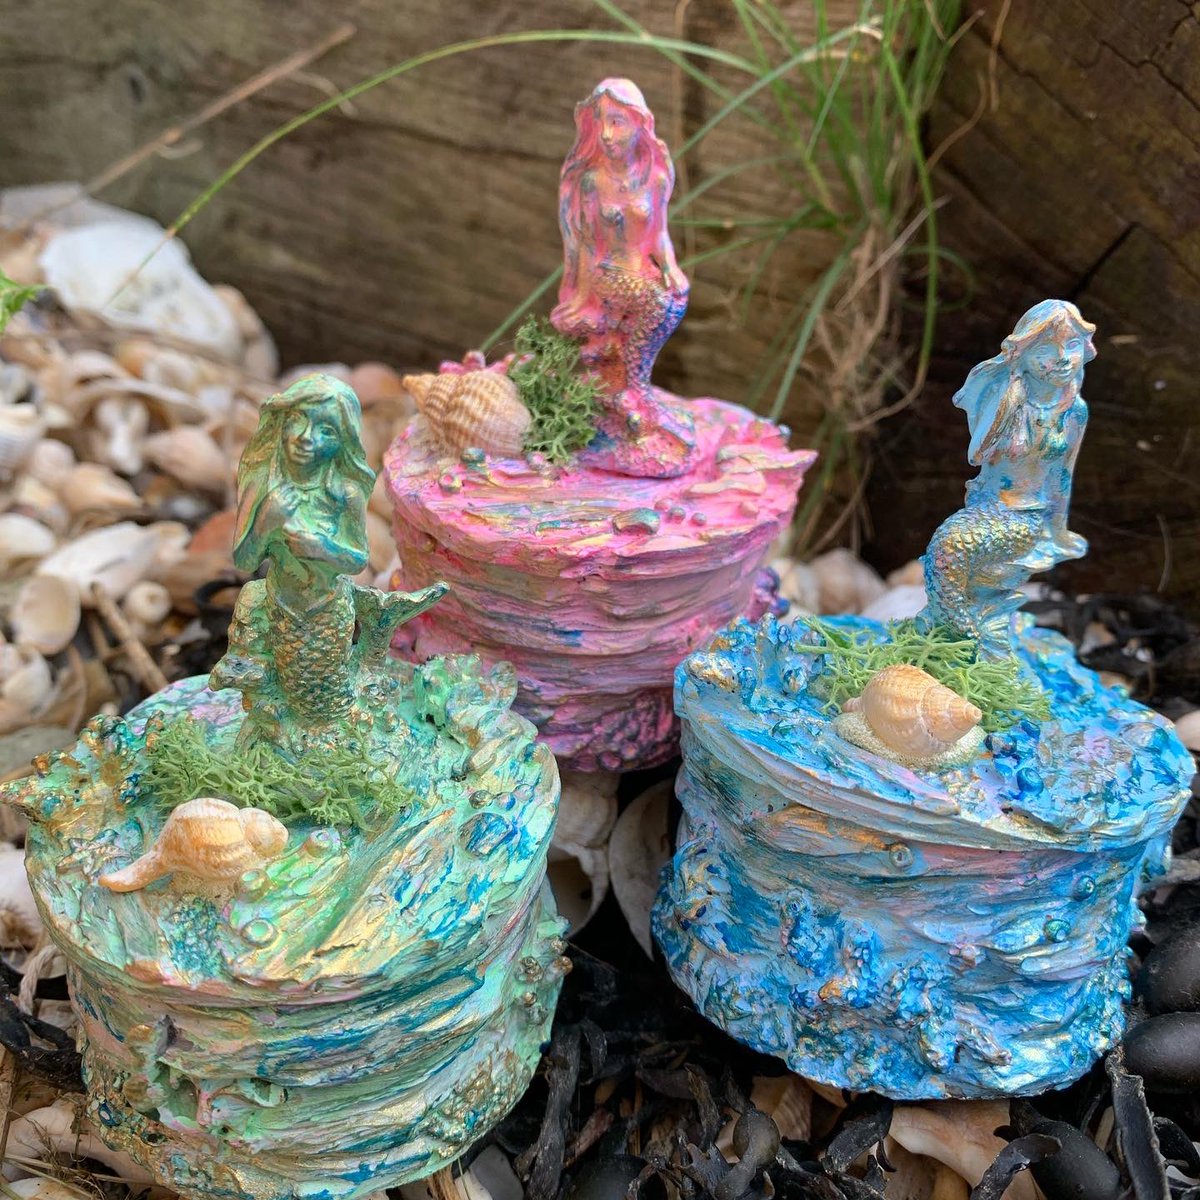 Mermaid 🧜‍♀️ trinket boxes releasing 6pm today along with our fairy 🧚‍♀️ boxes too.

divinecurriosities.co.uk

#EarlyBiz #mermaids #mermaidgifts #elevenseshour #handmade